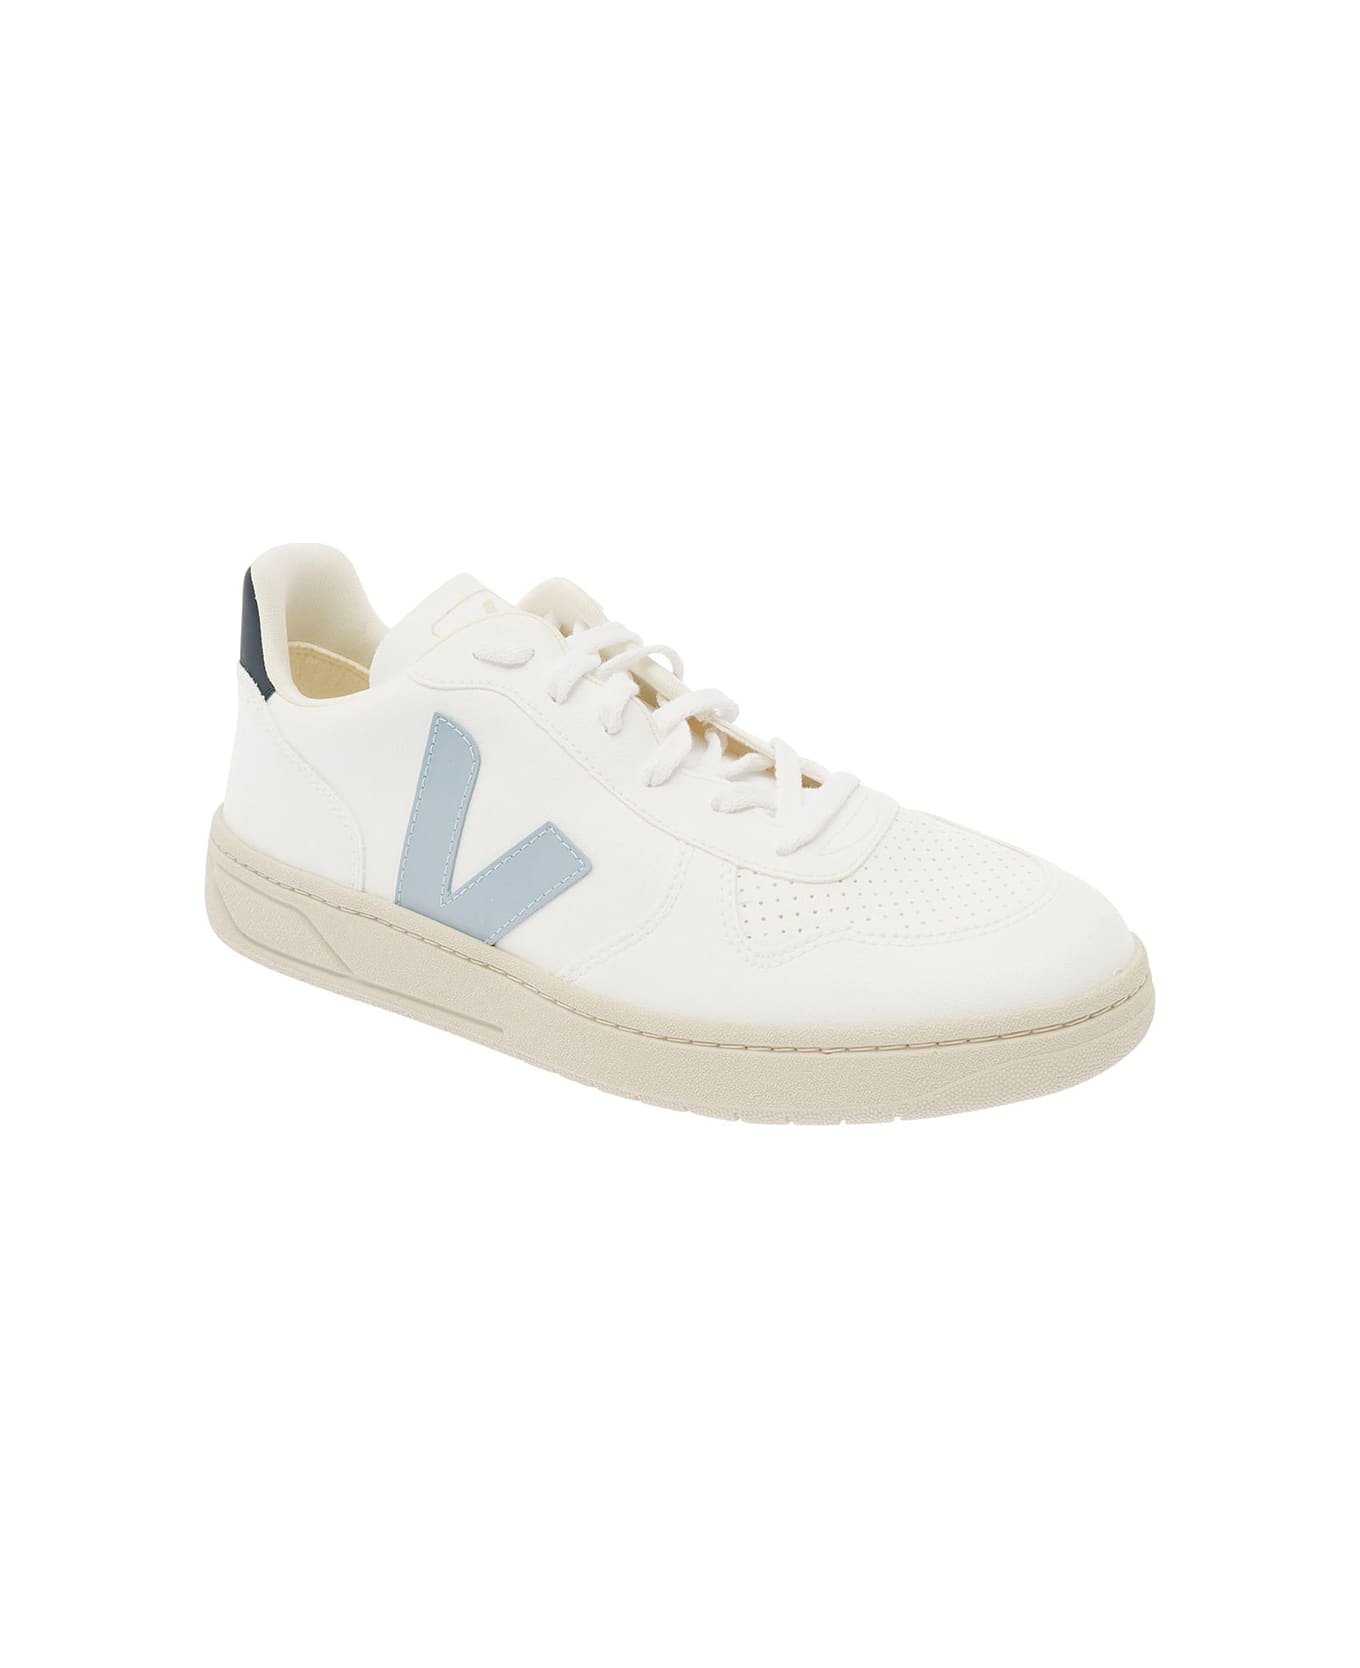 Veja White And Light Blue Sneakers With Logo Details In Leather Man - White スニーカー